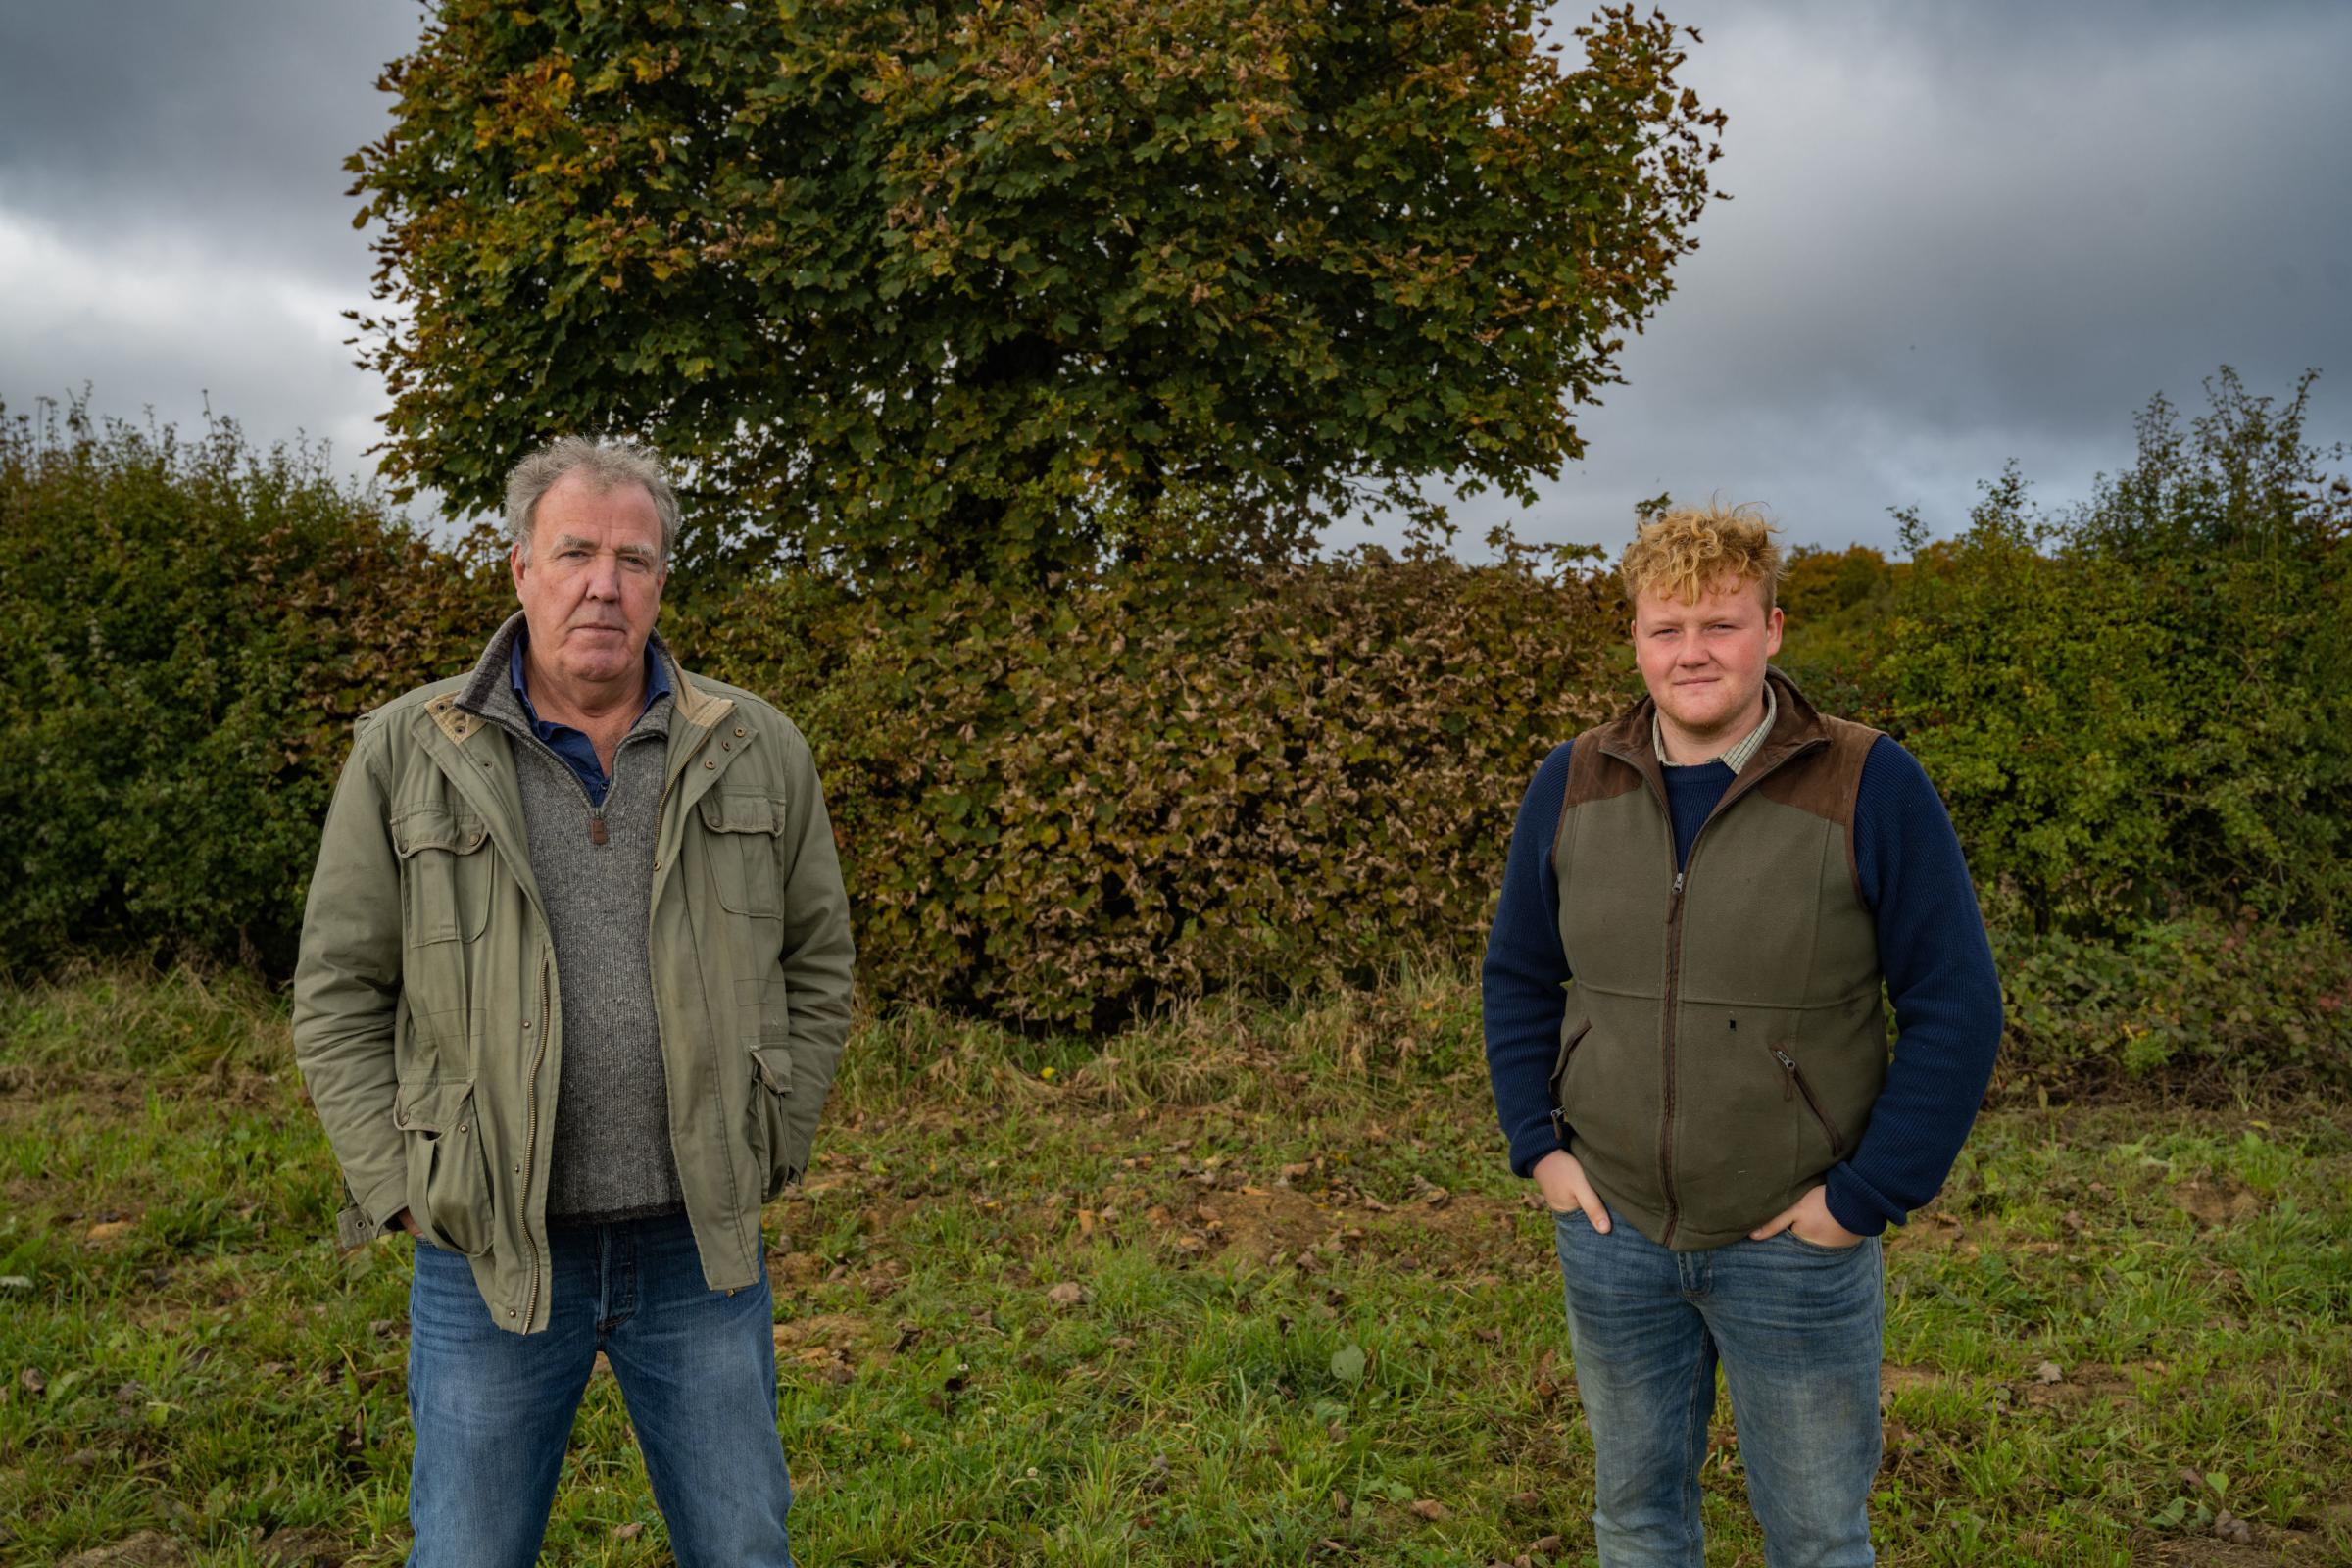 Jeremy Clarkson and Kaleb in Clarksons Farm Picture: PA/AMAZON PRIME